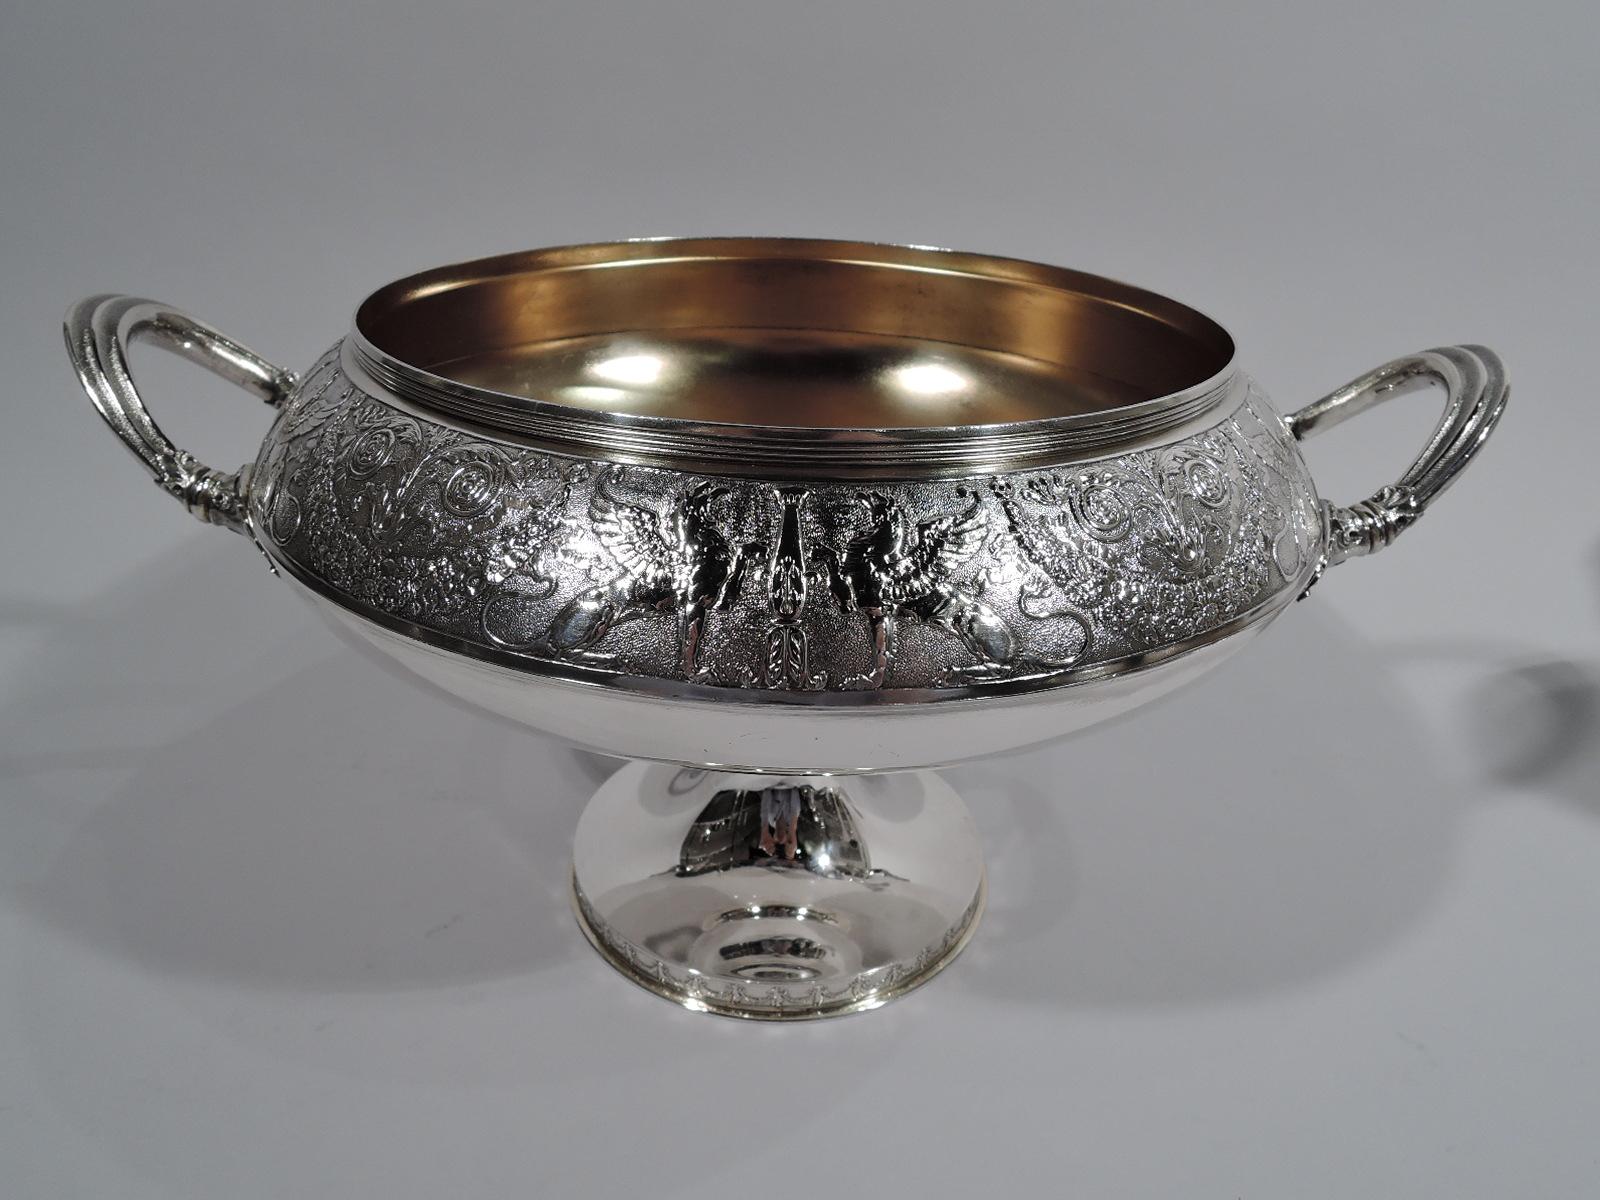 American Classical sterling silver compote. Made by Gorham in Providence in 1876. Bellied bowl with leaf-mounted c-scroll side handles and knopped stem flowing into round and raised foot. Low-relief ornament on stippled ground. Bowl has wraparound